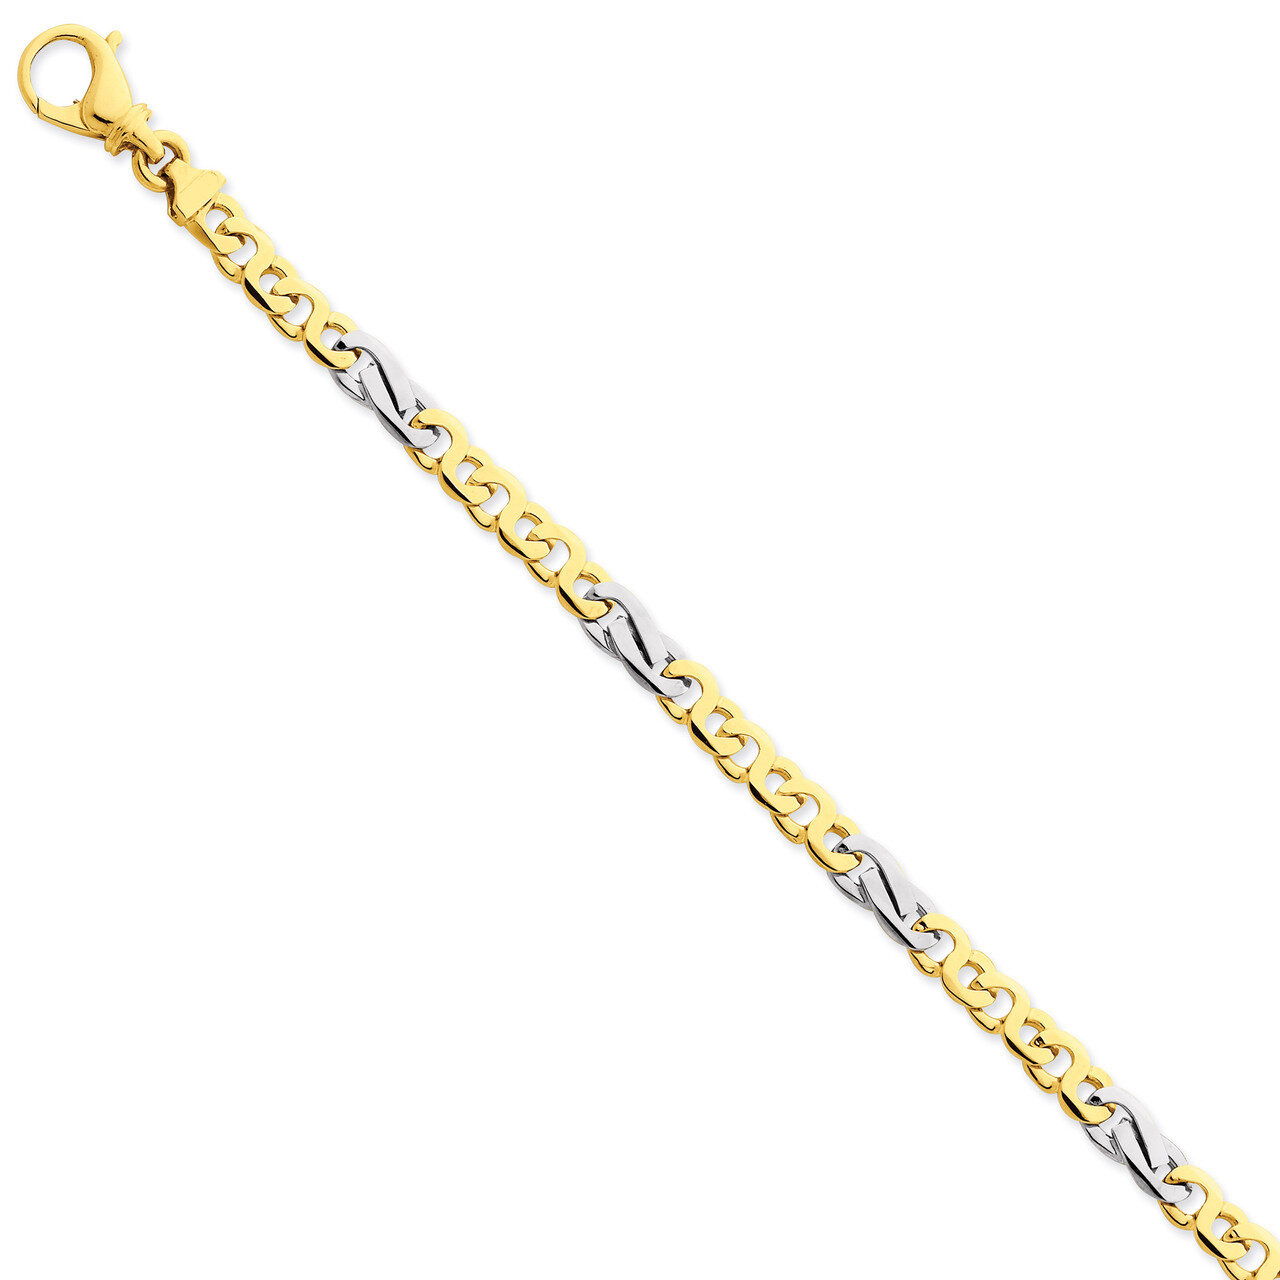 6.2mm Polished Fancy Link Chain 9 Inch 14k Two-Tone Gold LK523-9